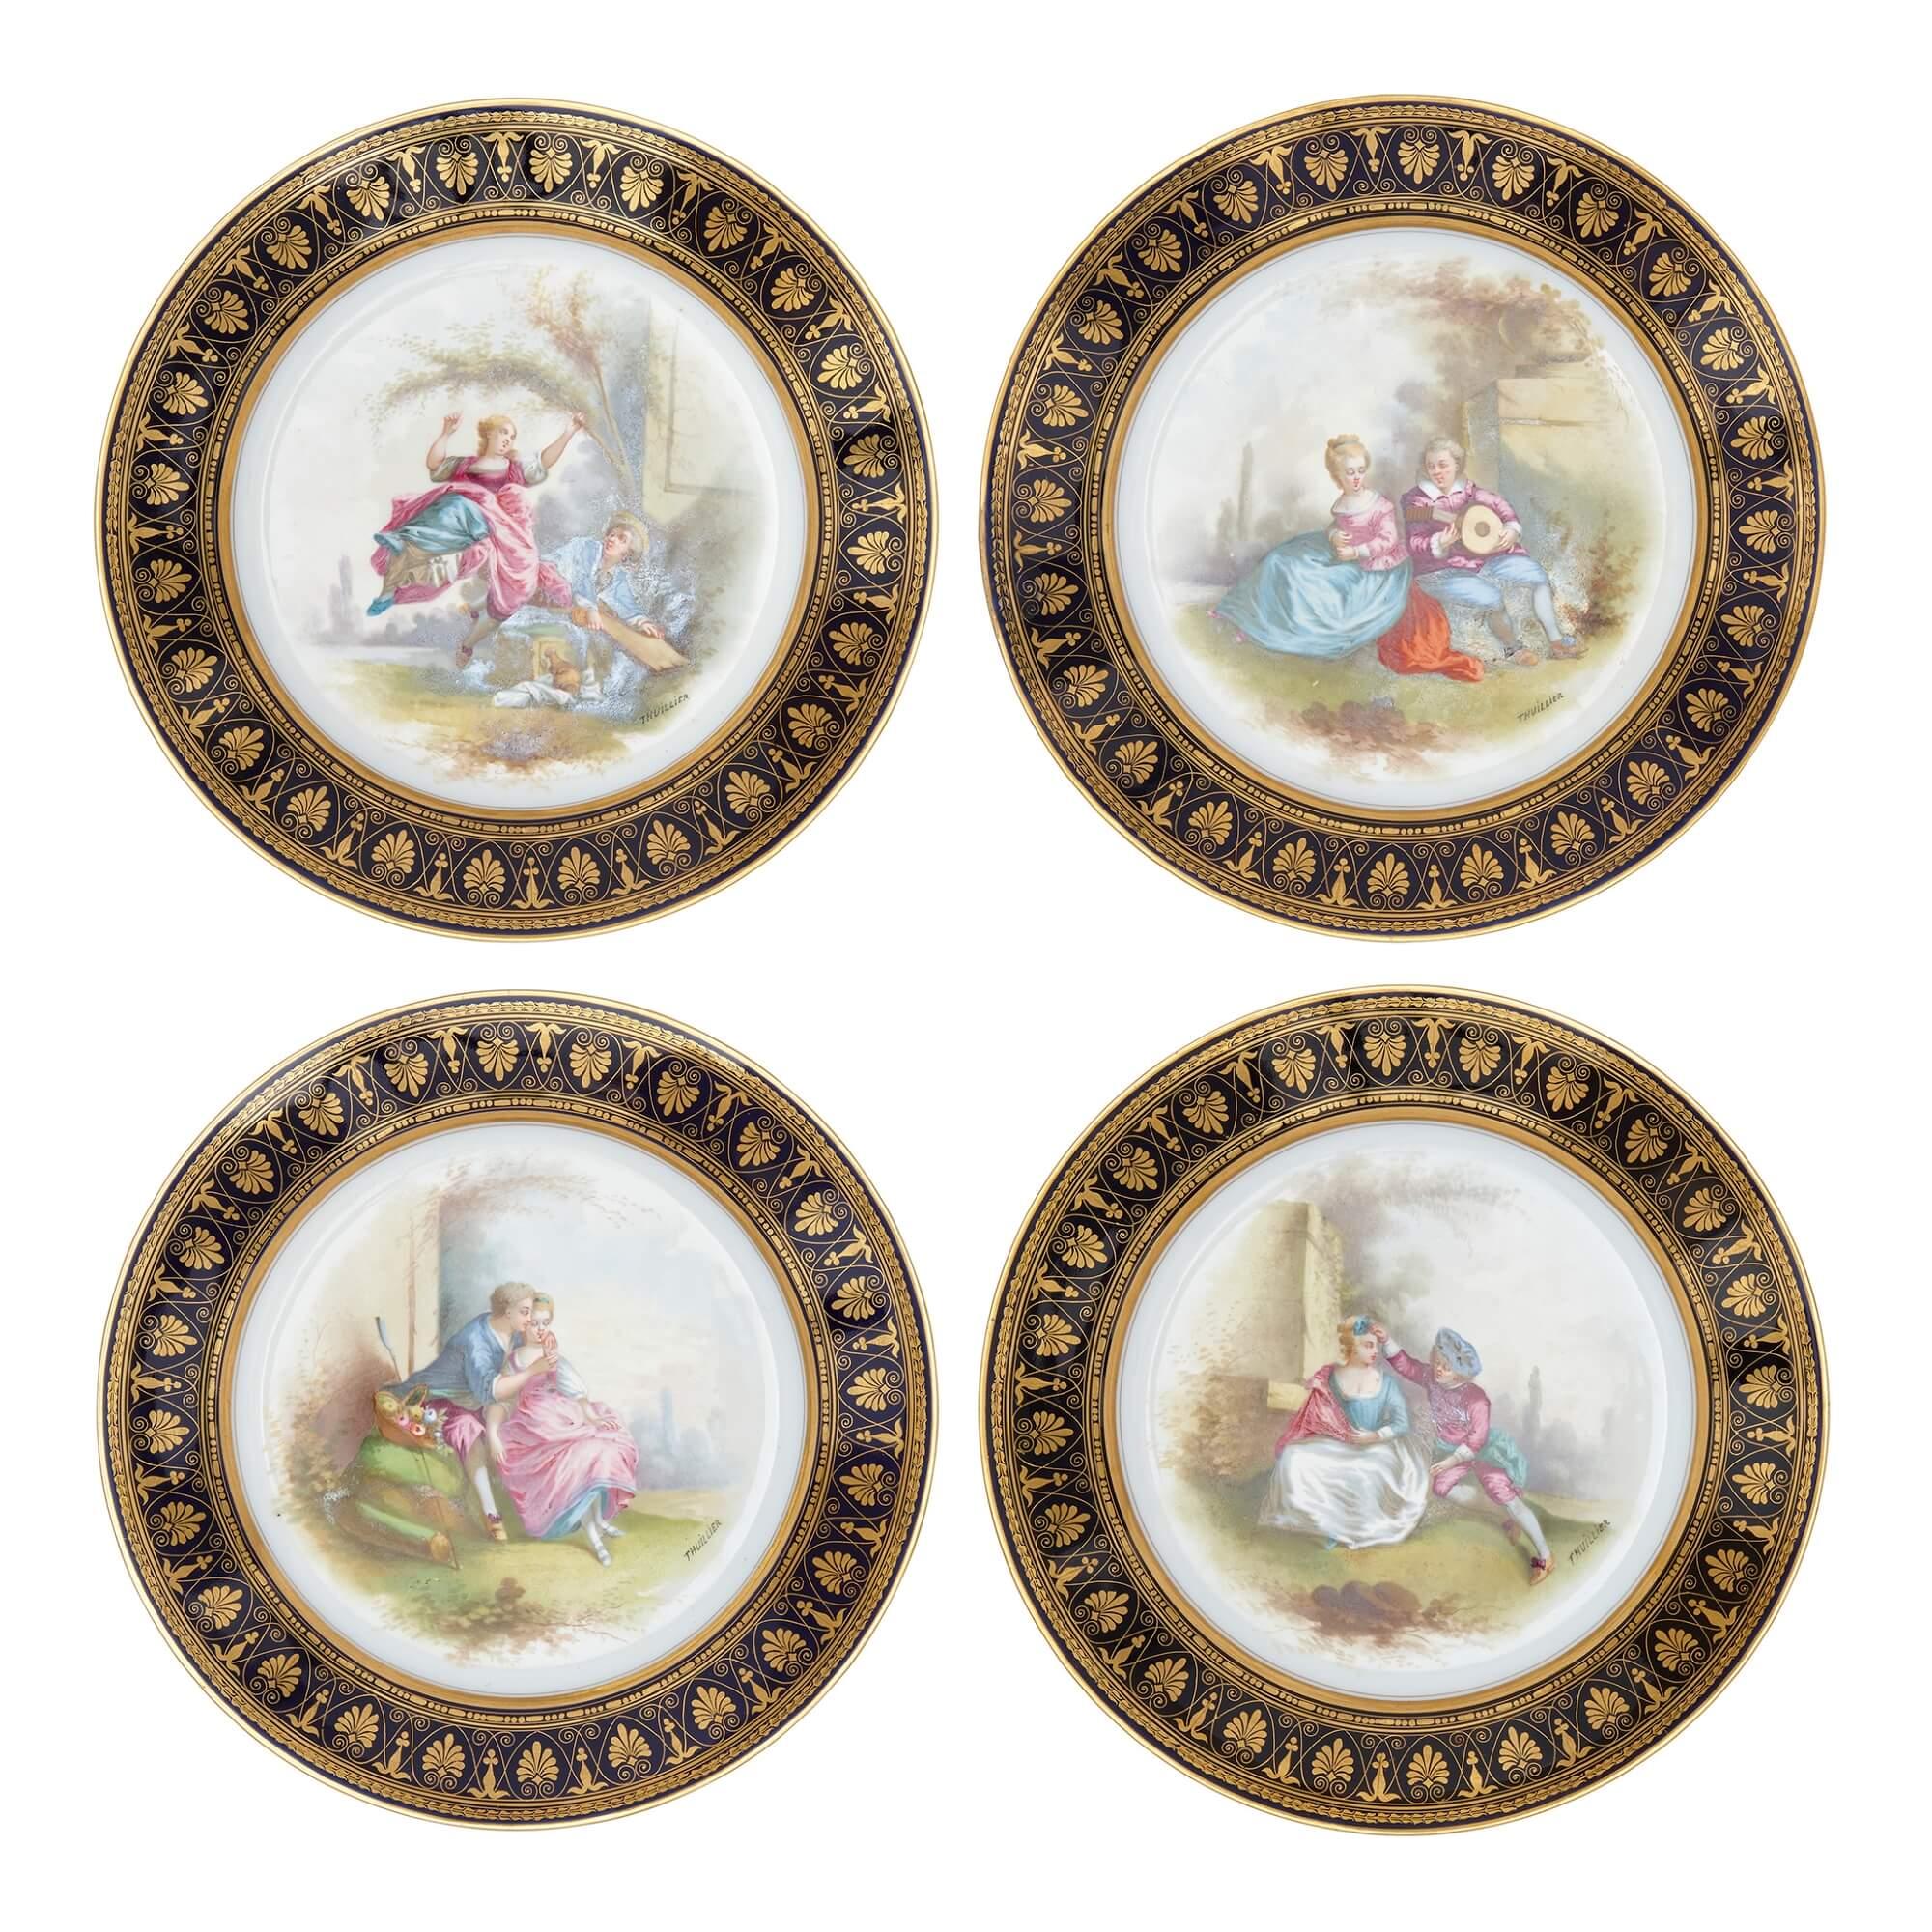 Napoleon III Set of 12 Sèvres Porcelain Plates with Hand-Painted Pastoral Scenes For Sale